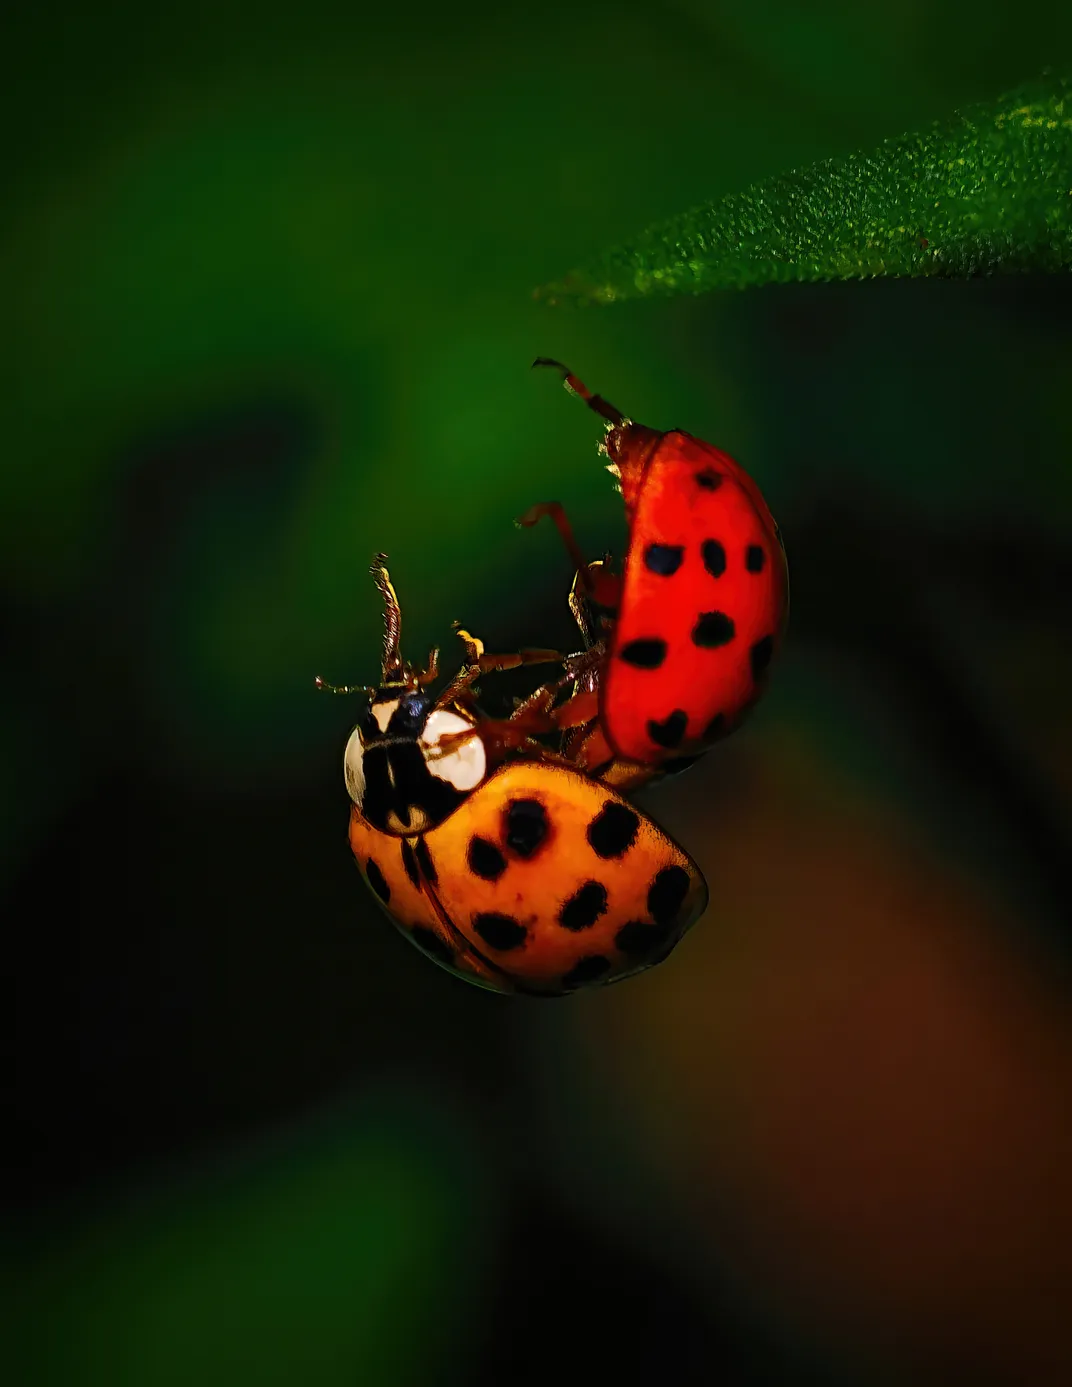 8 - Two ladybugs are captured midair as they tumble off of a leaf.